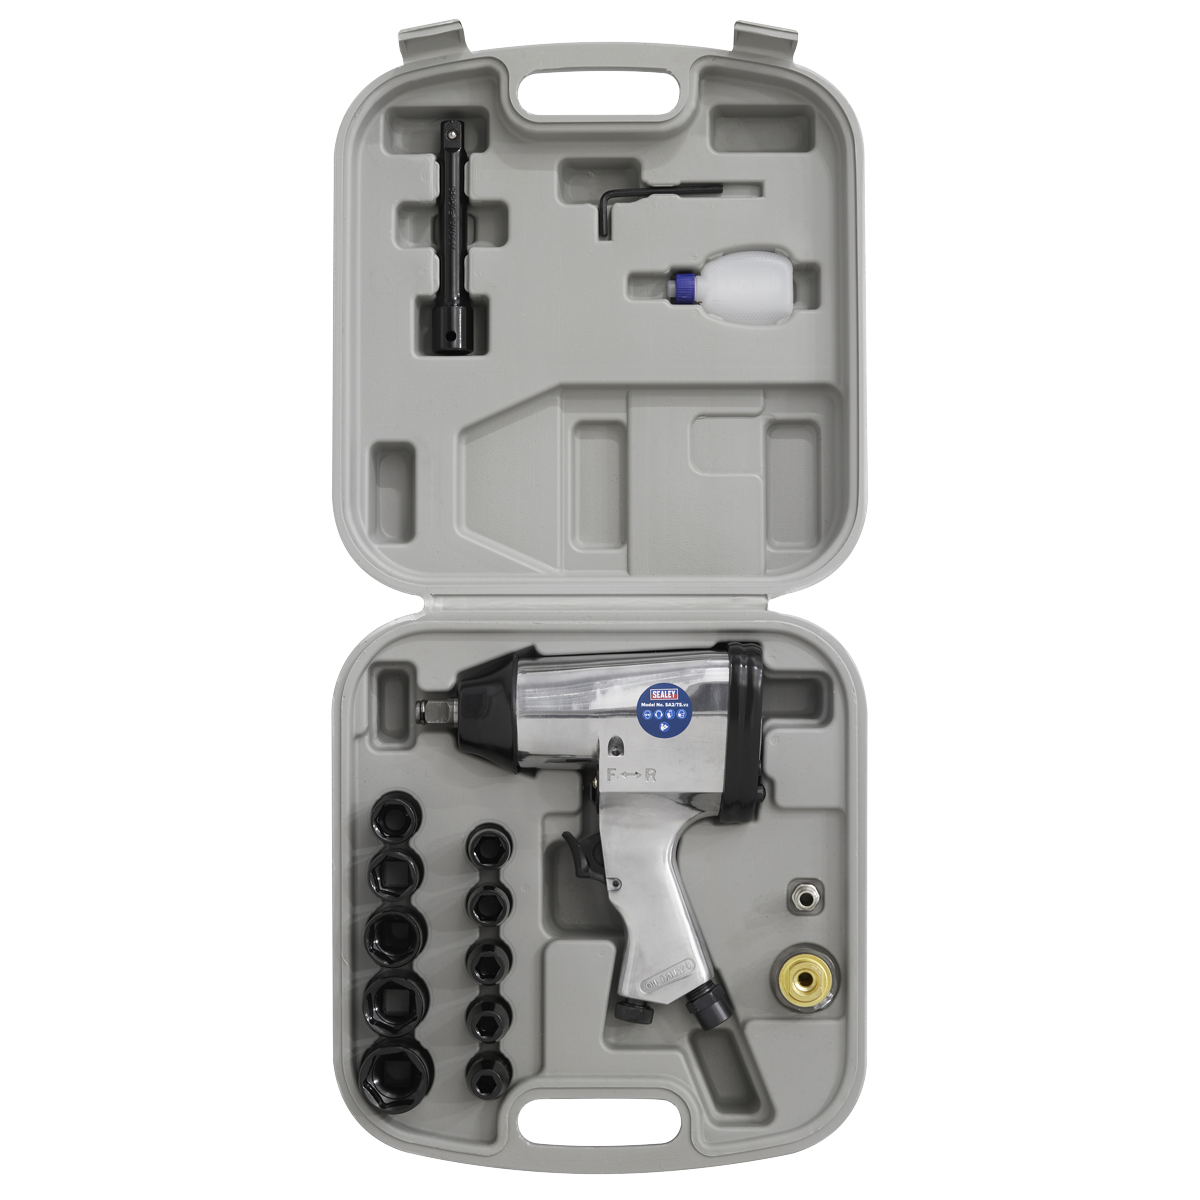 Air Impact Wrench Kit with Sockets 1/2"Sq Drive